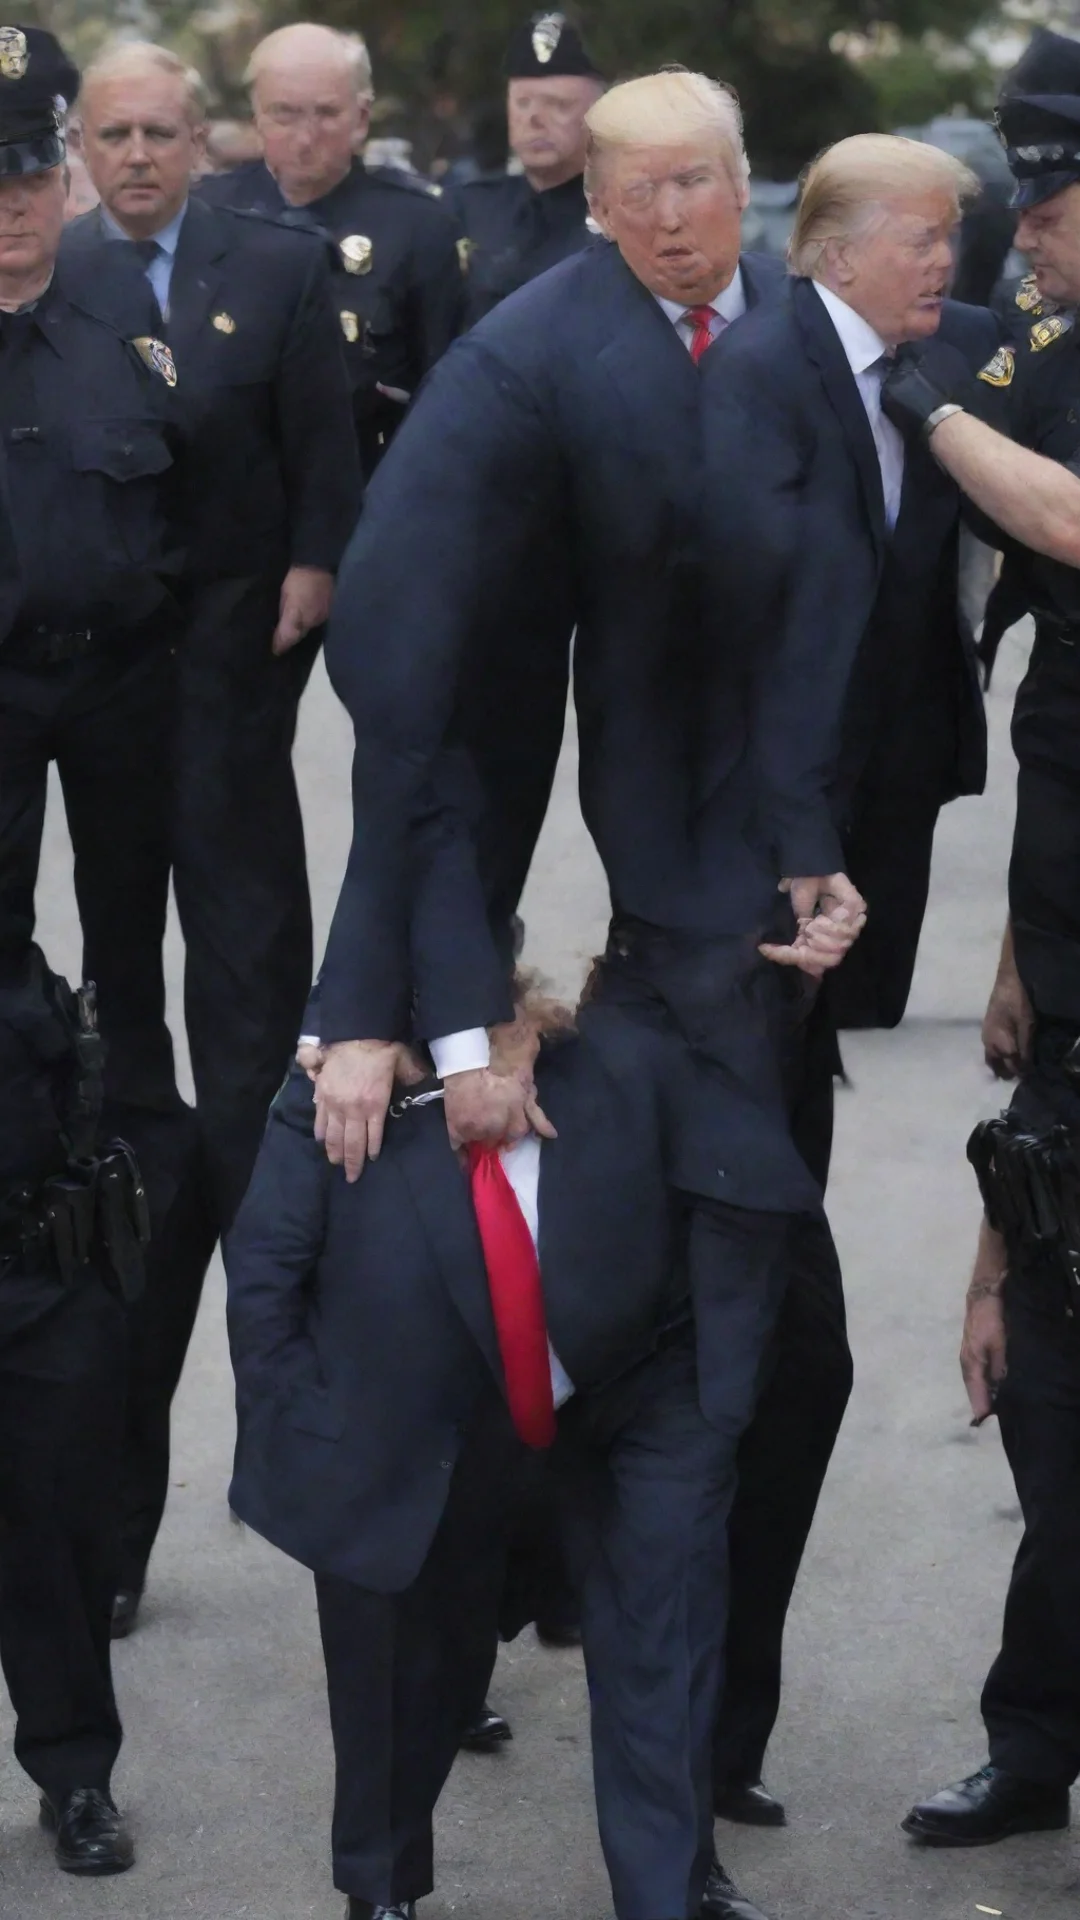 aiamazing donald trump being led away in handcuffs awesome portrait 2 tall